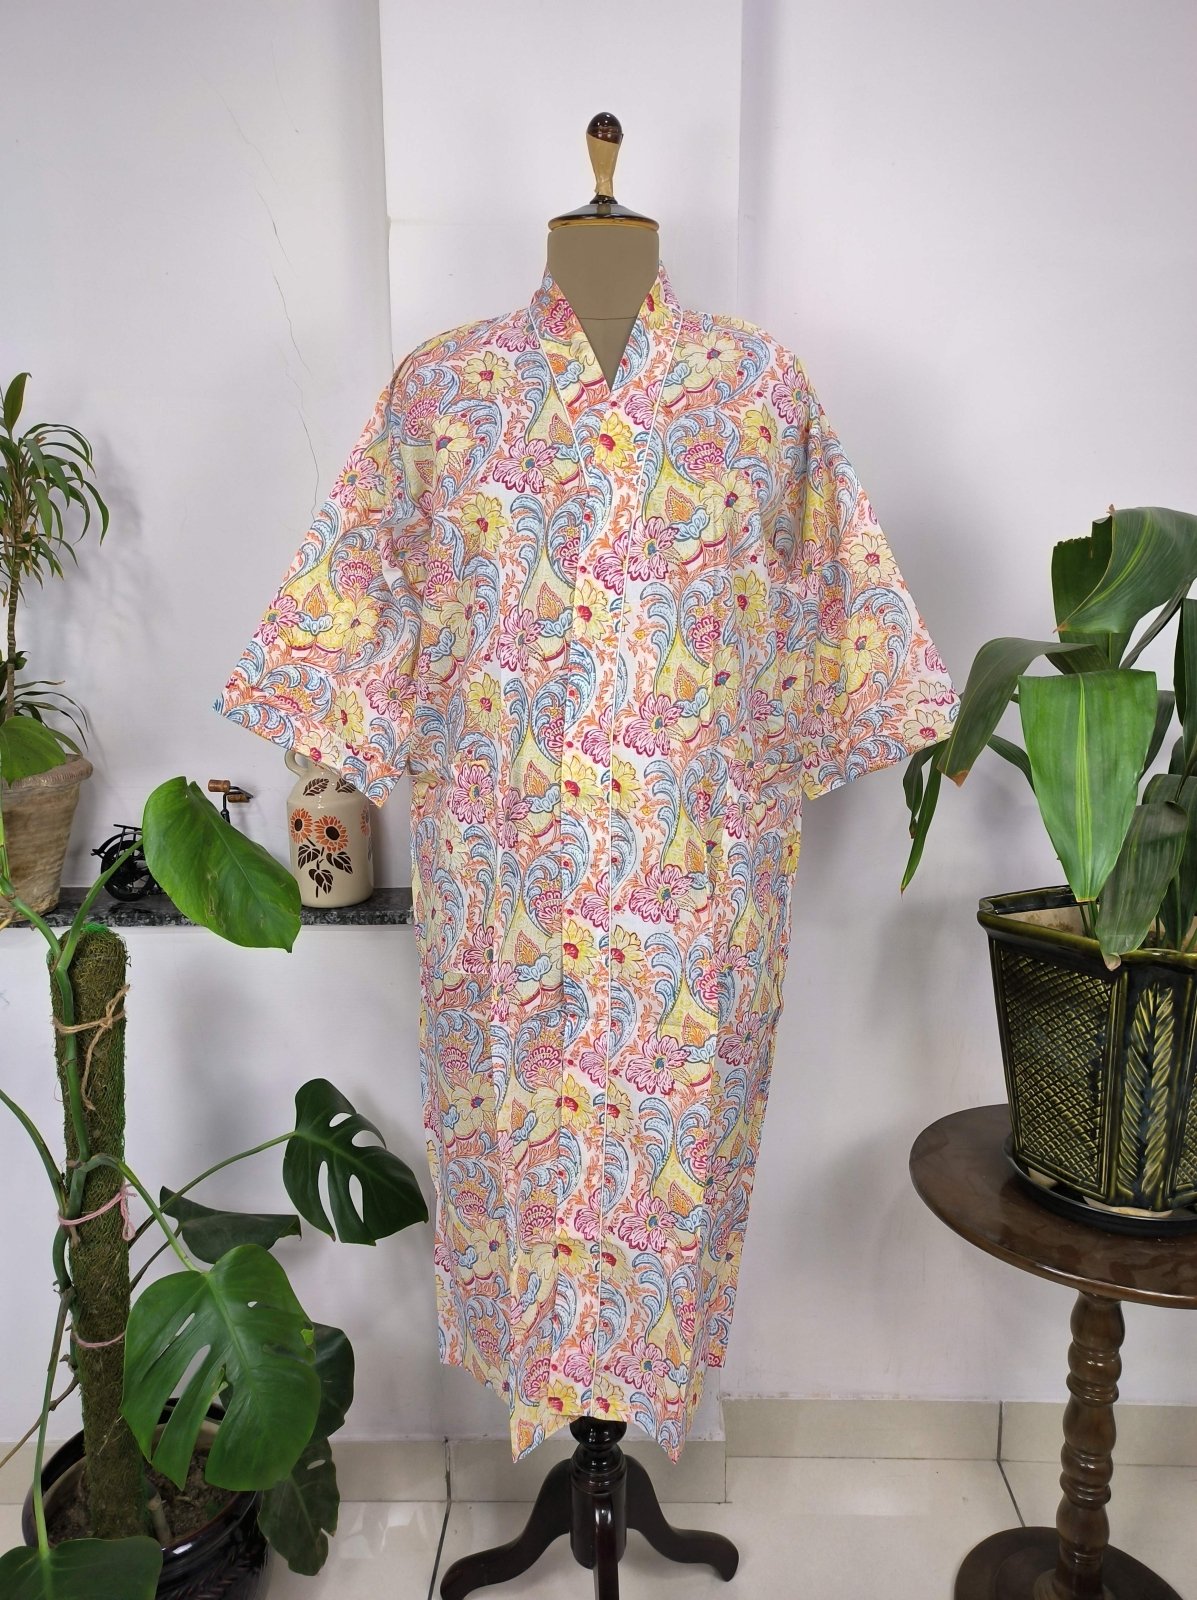 Boho House Robe Indian Handprinted Cotton Kimono Lively Blossoms | Perfect for Summer Luxury Beach Holidays Yacht Cover Up Stunning Dress - The Eastern Loom